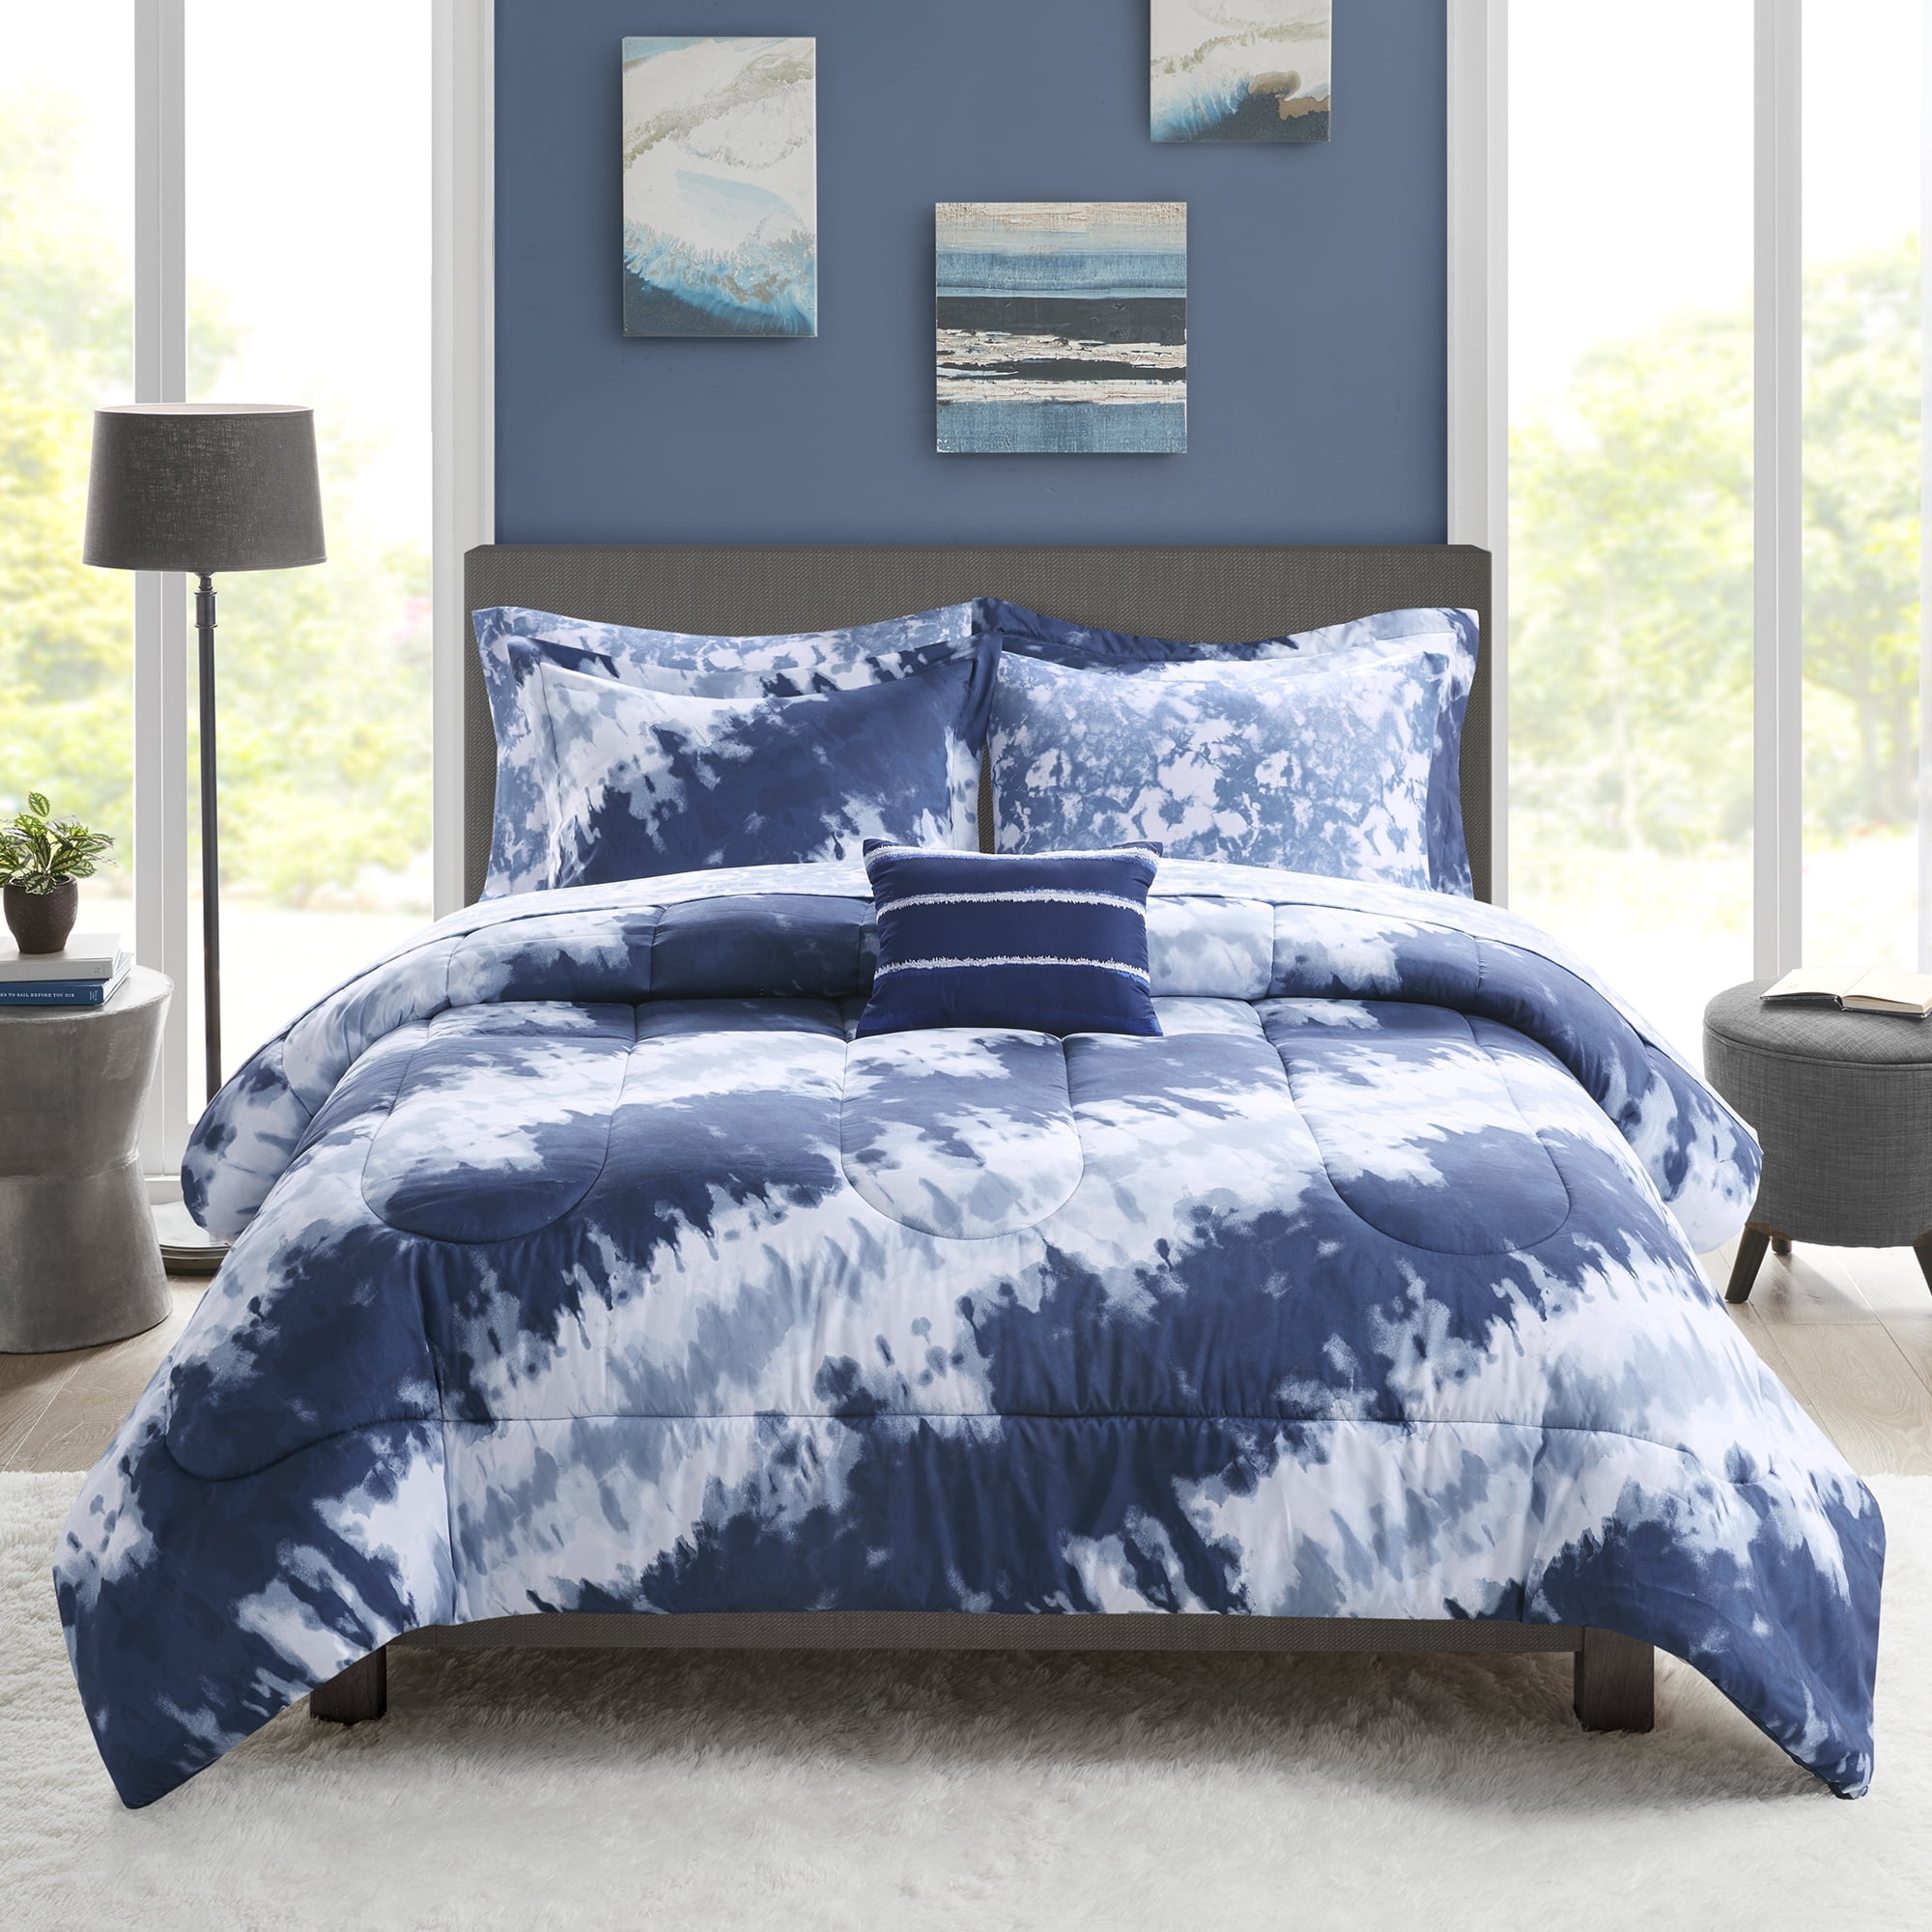 Mainstays Blue Tie Dye 5 Piece Bed in A Bag Comforter Set with Sheets, Twin/Twin XL, Size: Twin / Twin XL